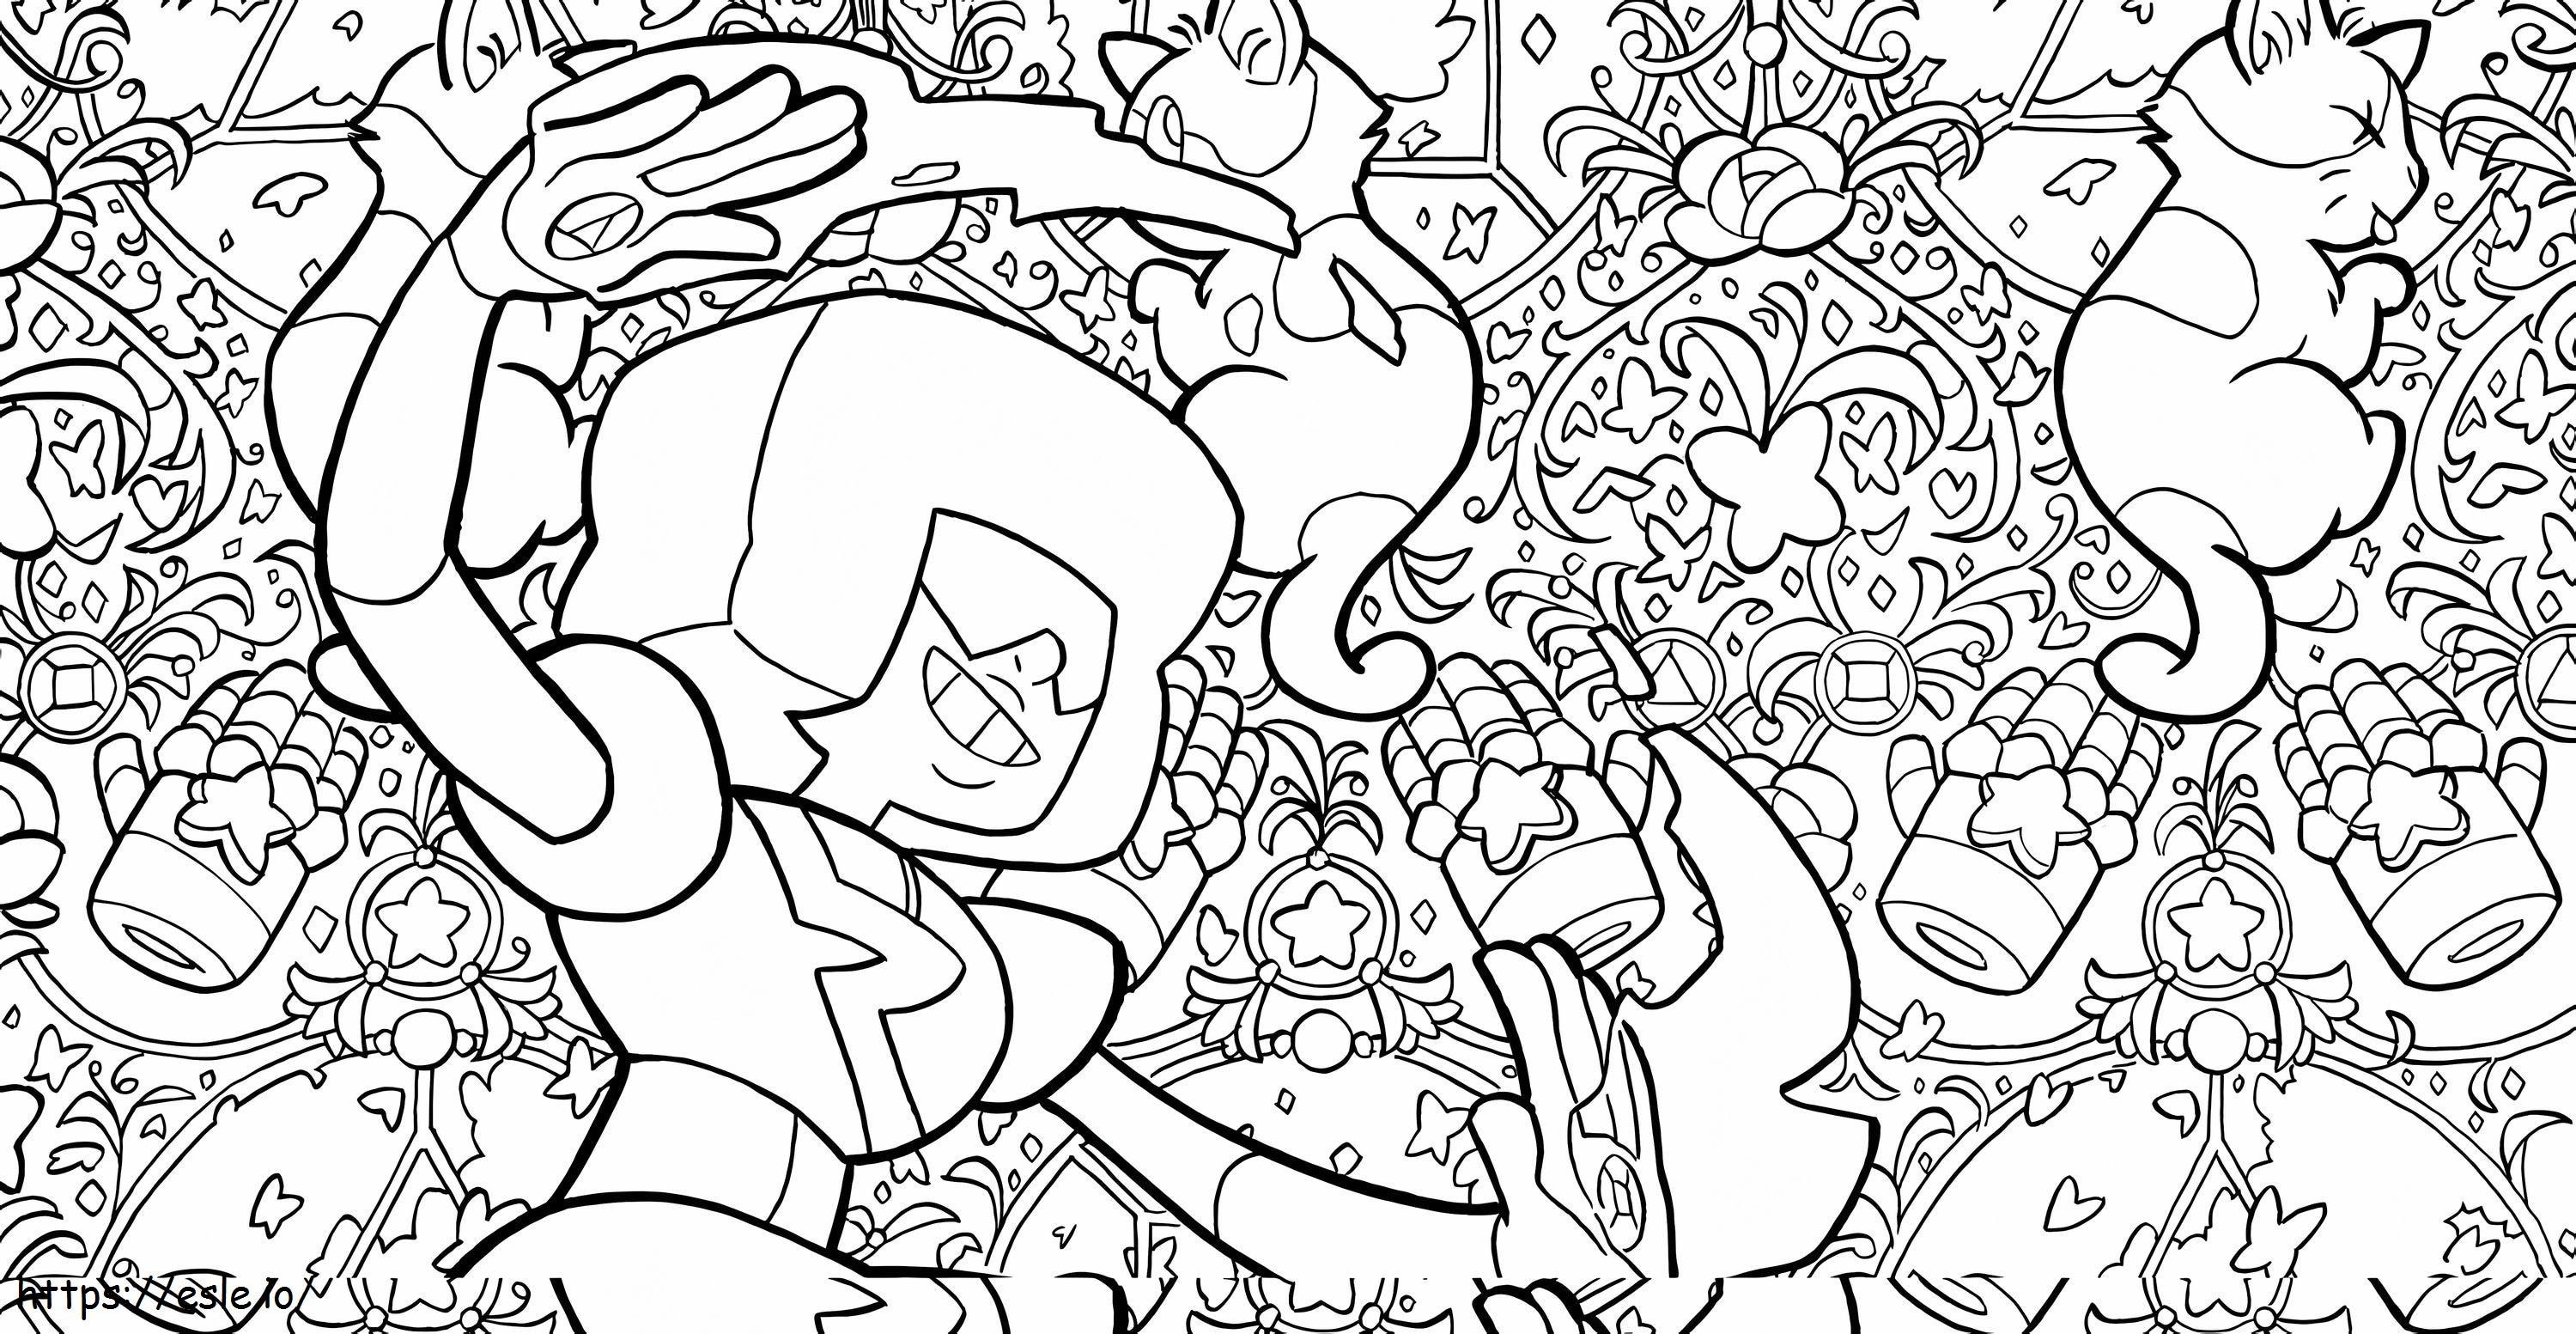 Grenades Adult coloring page